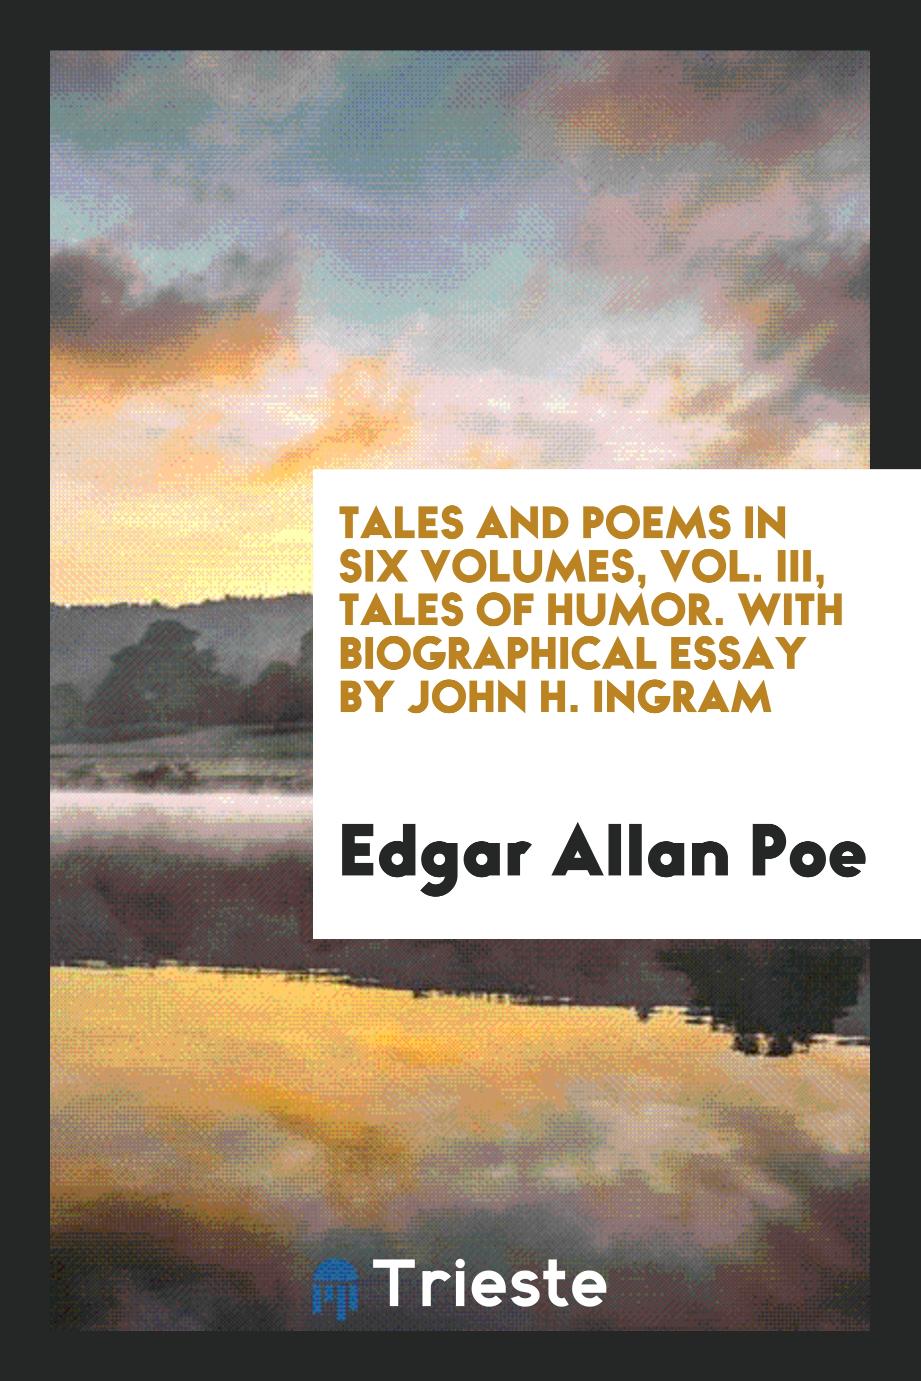 Tales and poems in six volumes, Vol. III, Tales of humor. With biographical essay by John H. Ingram